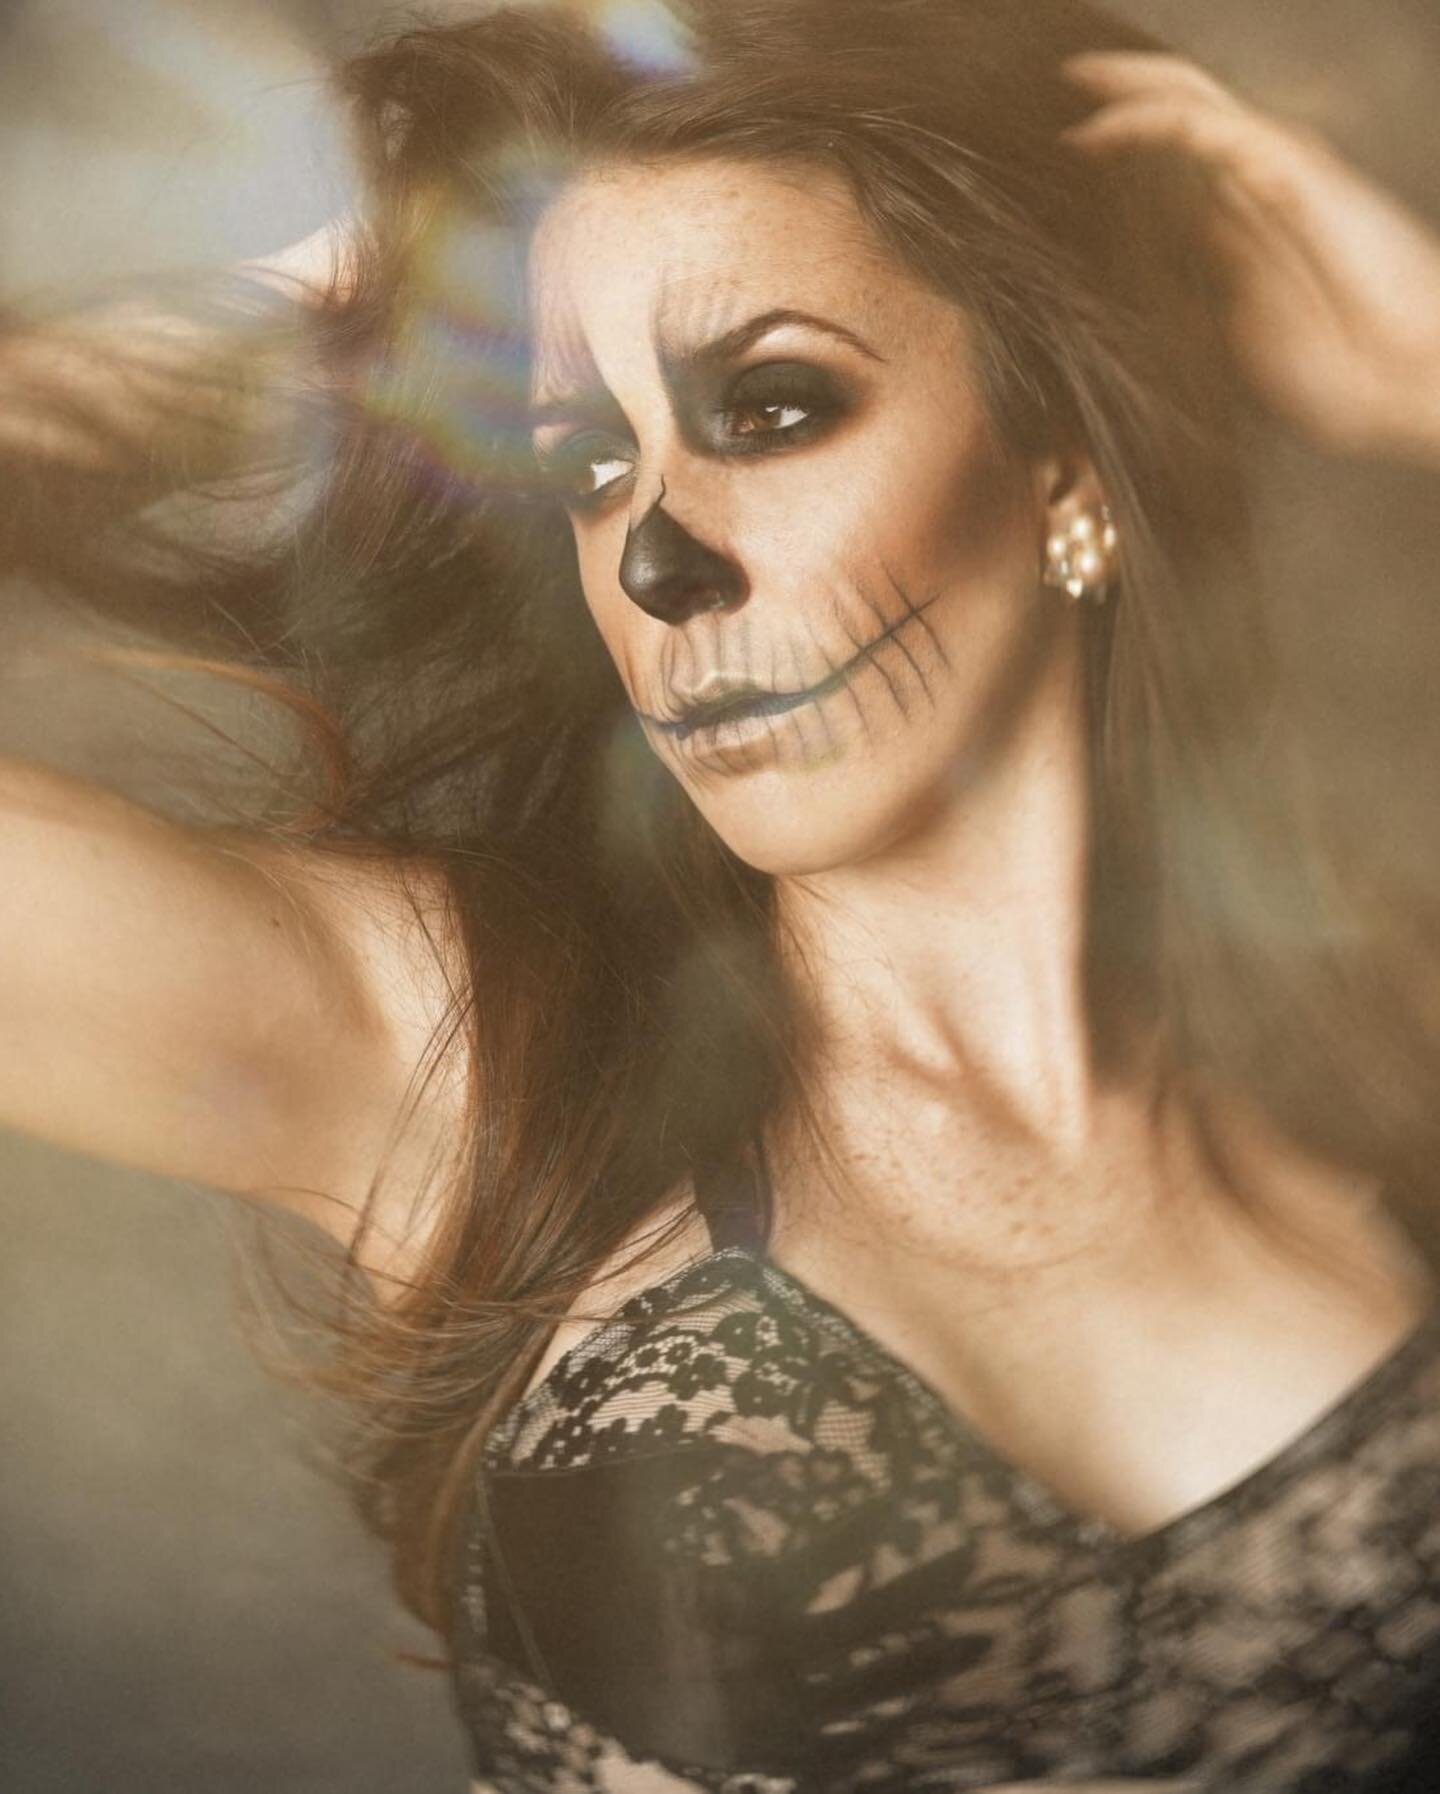 The best way to get into the spooky spirit this Halloween season is by going all out with your makeup!

 My makeup artist @alluringmakeupartistrybykatey and I collaborated for a fun play day. Love this creative spooky vibe

Katey can amplify your mak